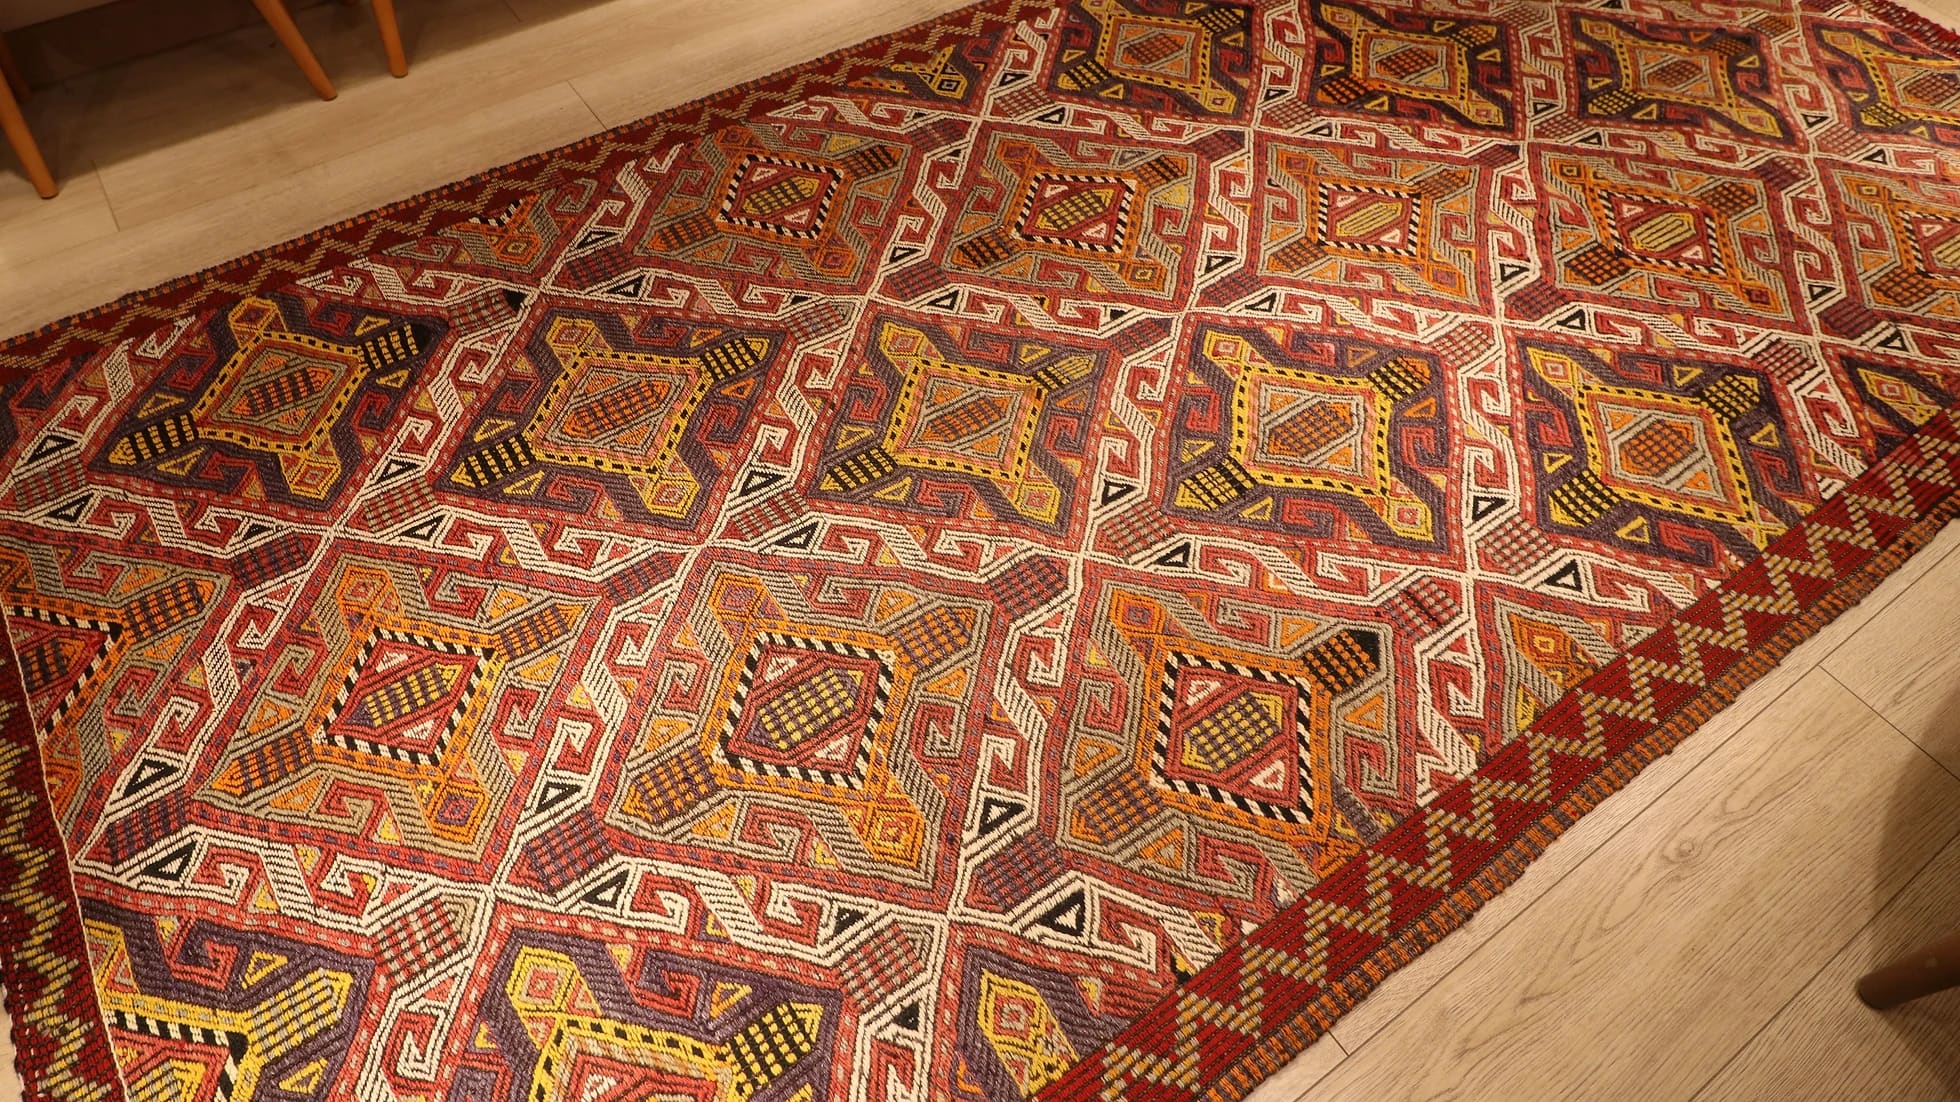 a very captivating Cicim rug from Turkey in natural earthy color palette with many all over traditional geometric patterns and motifs